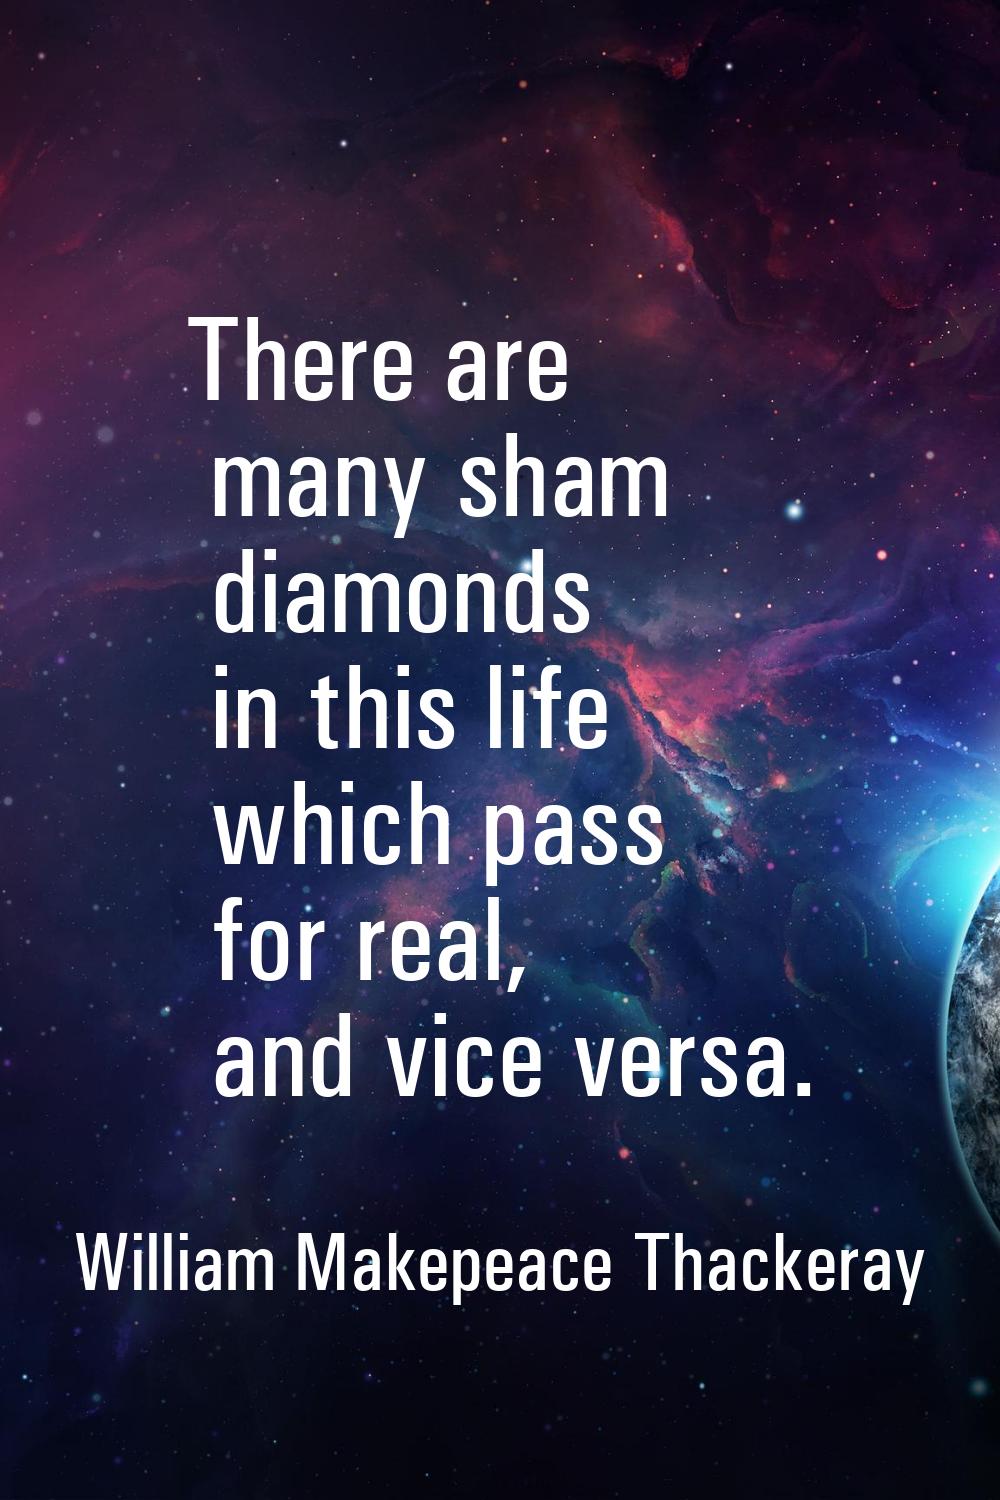 There are many sham diamonds in this life which pass for real, and vice versa.